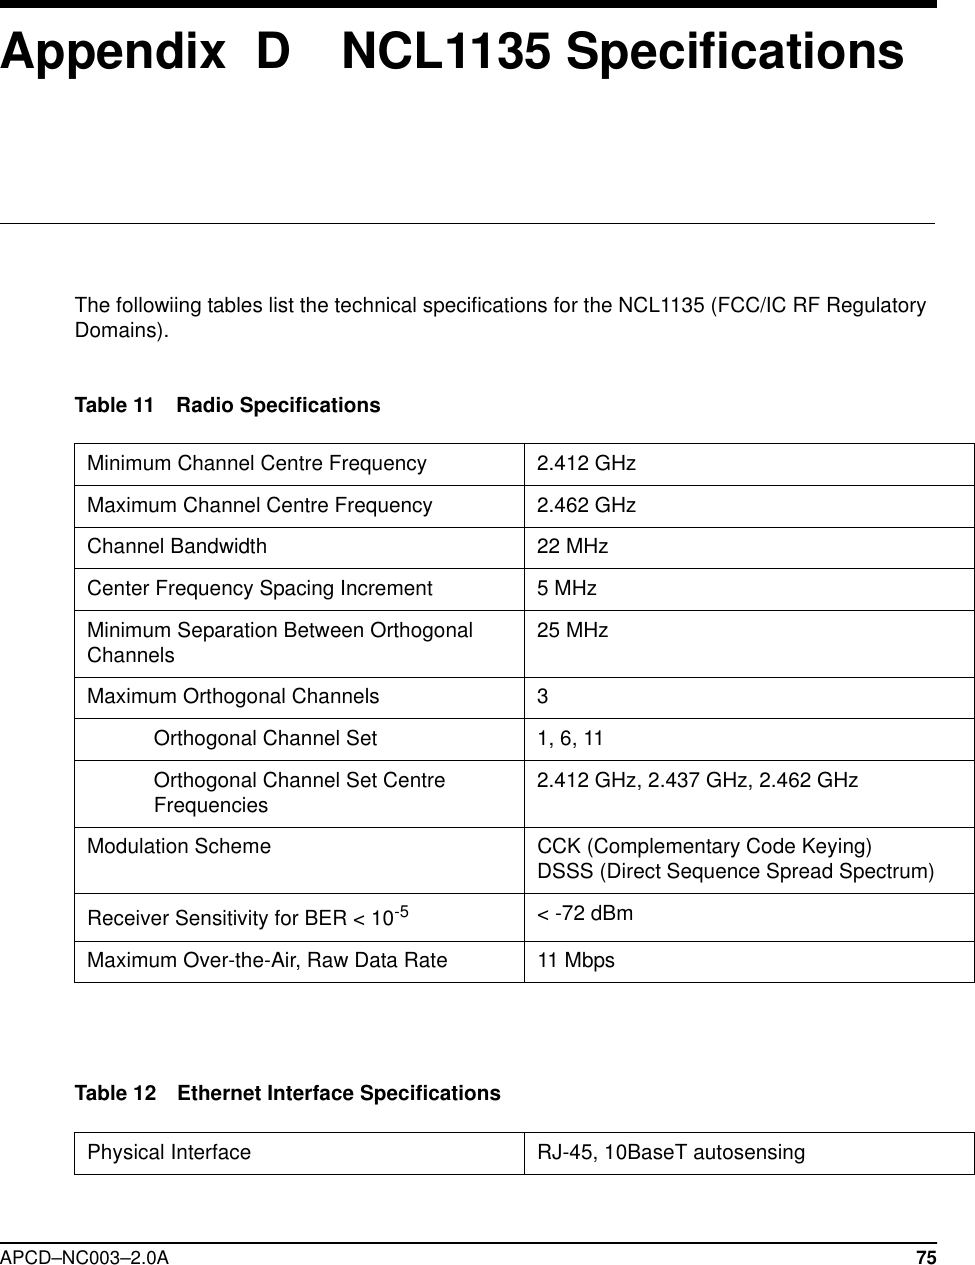 APCD–NC003–2.0A 75Appendix  D    NCL1135 SpecificationsThe followiing tables list the technical specifications for the NCL1135 (FCC/IC RF Regulatory Domains).Table 11 Radio Specifications Table 12 Ethernet Interface Specifications Minimum Channel Centre Frequency 2.412 GHzMaximum Channel Centre Frequency 2.462 GHzChannel Bandwidth 22 MHzCenter Frequency Spacing Increment 5 MHzMinimum Separation Between Orthogonal Channels 25 MHzMaximum Orthogonal Channels 3Orthogonal Channel Set 1, 6, 11Orthogonal Channel Set Centre Frequencies 2.412 GHz, 2.437 GHz, 2.462 GHzModulation Scheme CCK (Complementary Code Keying)              DSSS (Direct Sequence Spread Spectrum)Receiver Sensitivity for BER &lt; 10-5 &lt; -72 dBmMaximum Over-the-Air, Raw Data Rate 11 MbpsPhysical Interface RJ-45, 10BaseT autosensing